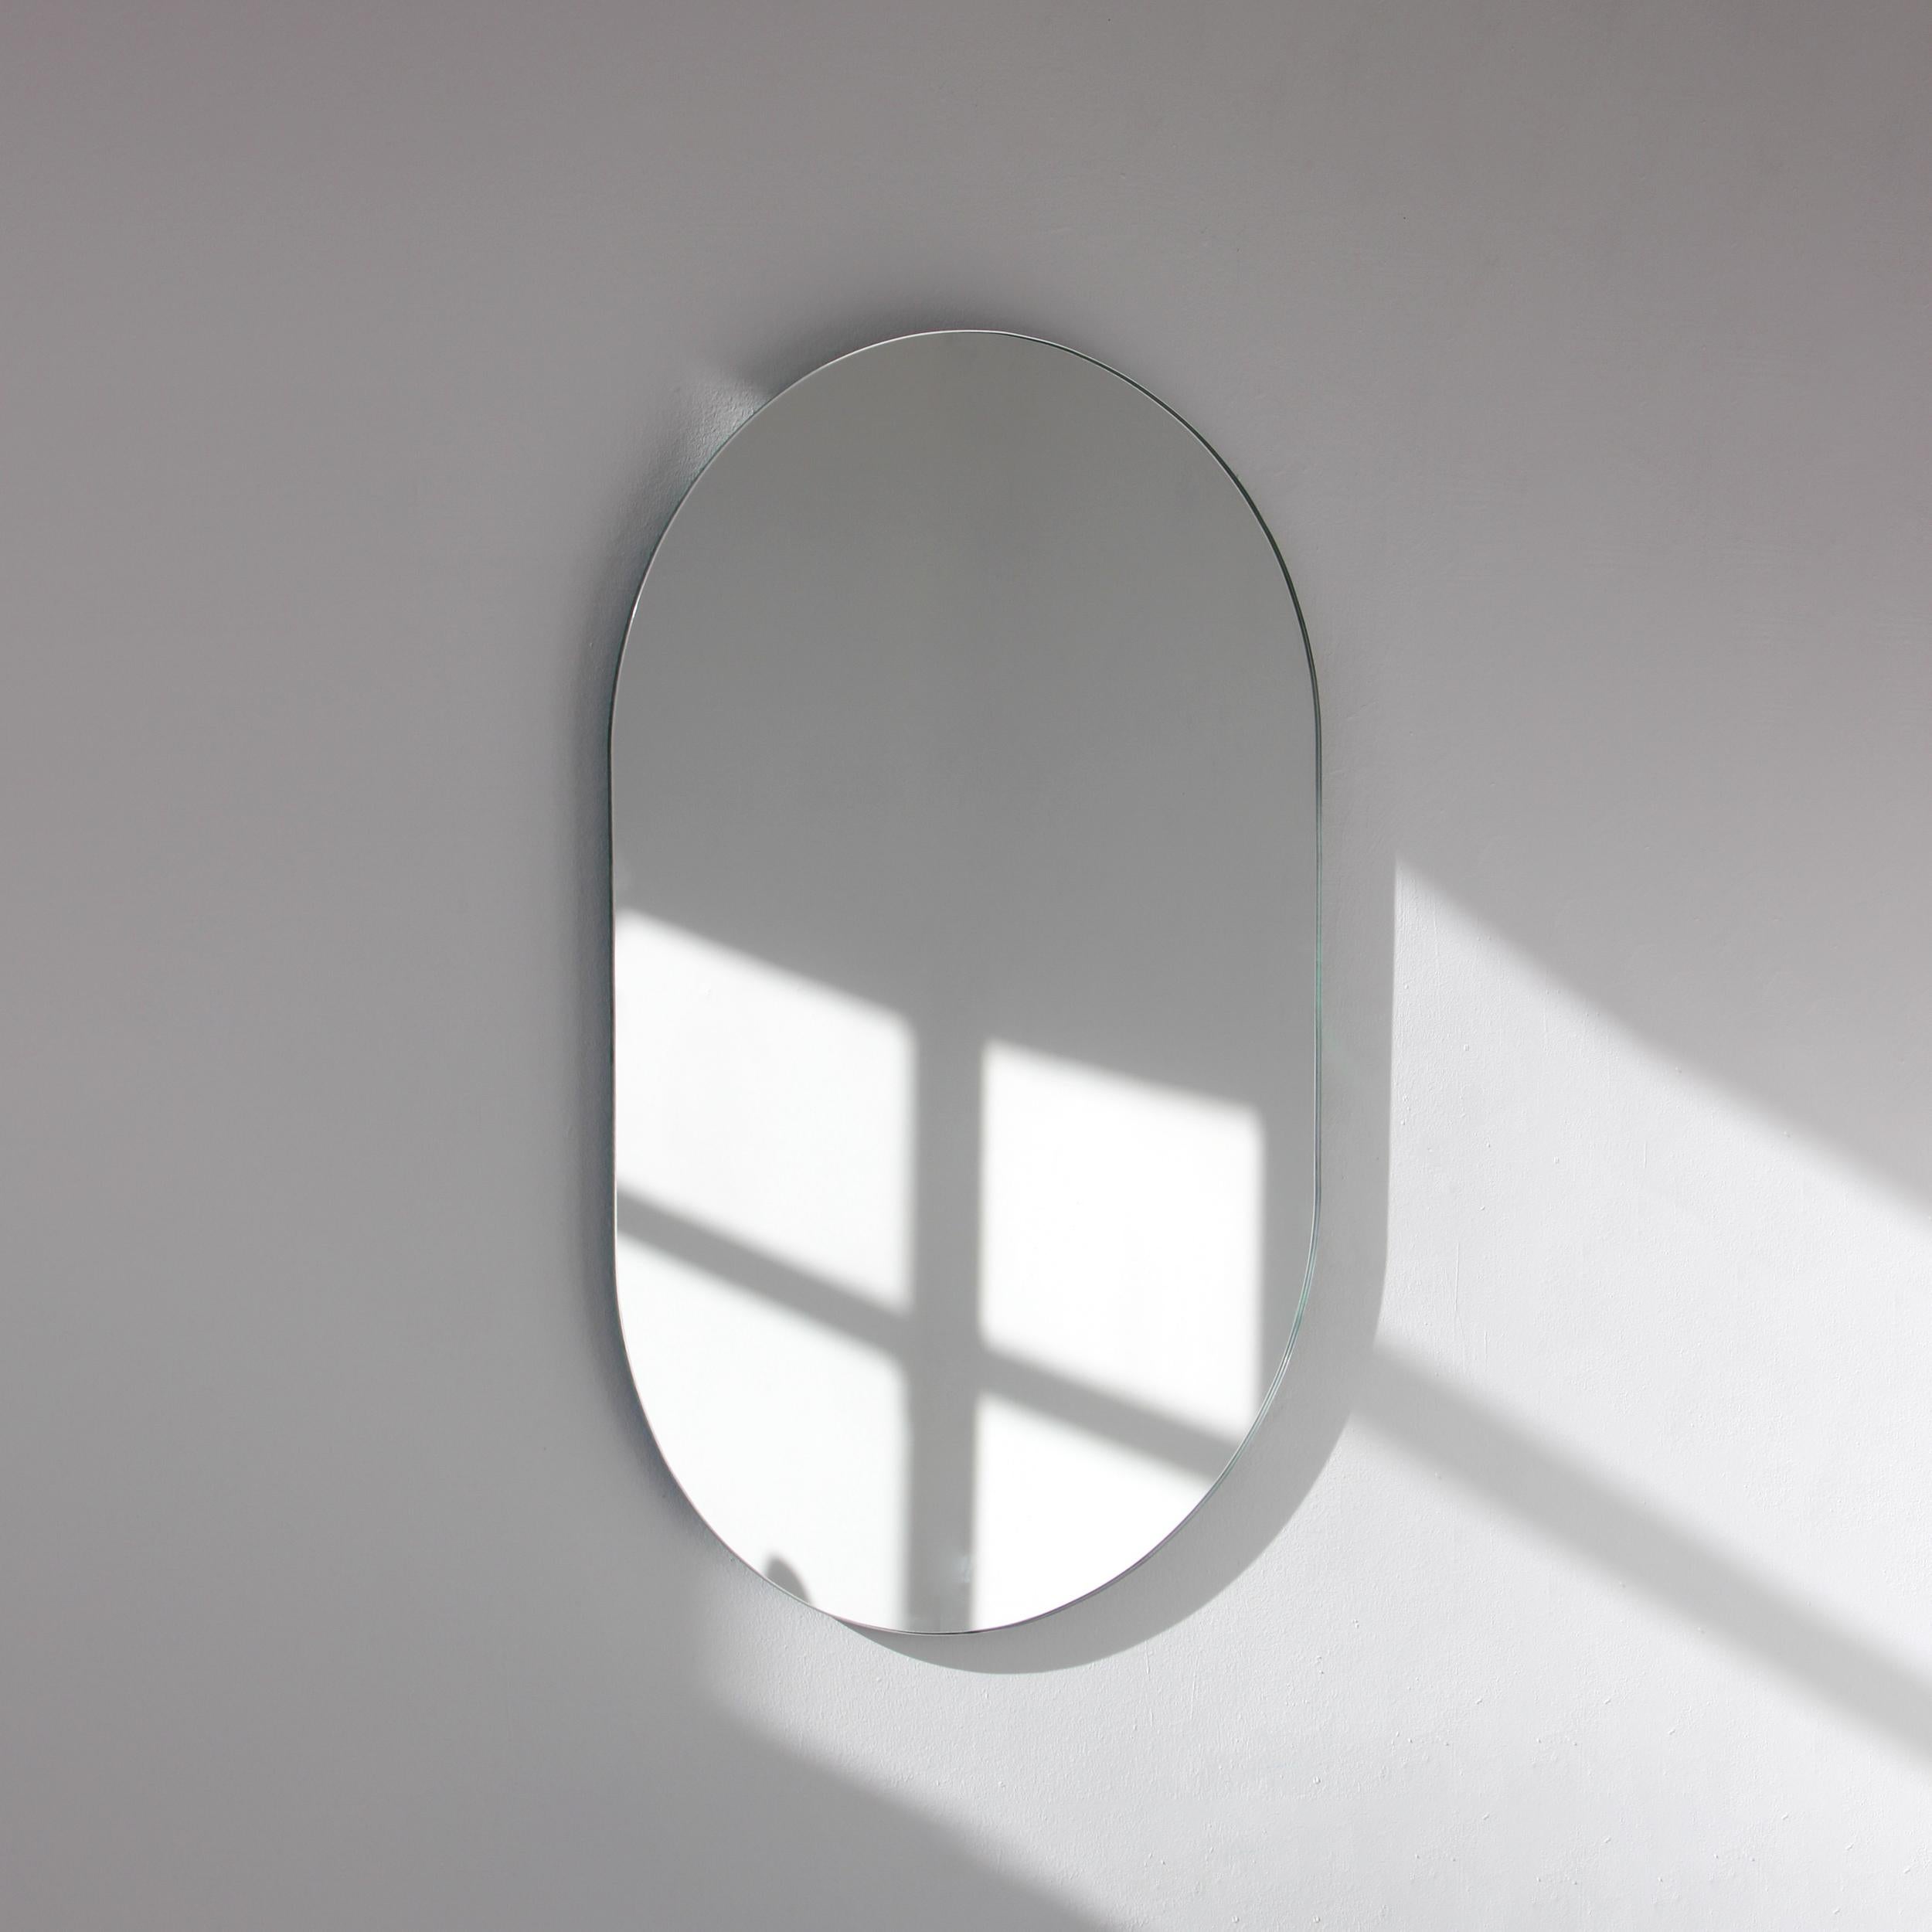 Minimalist capsule / pill shaped frameless mirror. Quality design that ensures the mirror sits perfectly parallel to the wall. Designed and made in London, UK.

Fitted with professional plates not visible once installed for an easy and safe